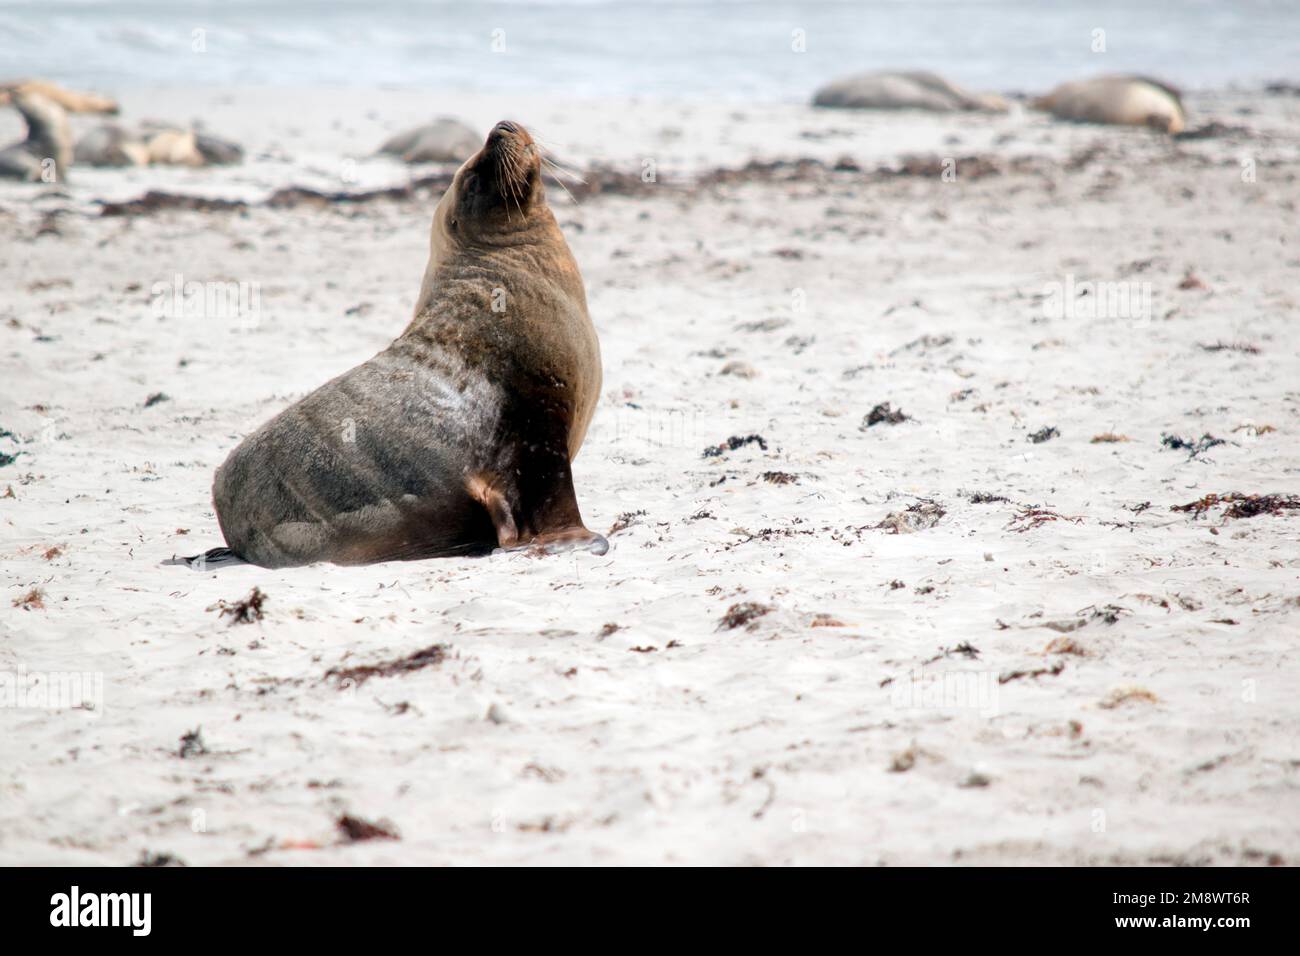 the male sea lion is walking on the beach looking for a place to rest Stock Photo